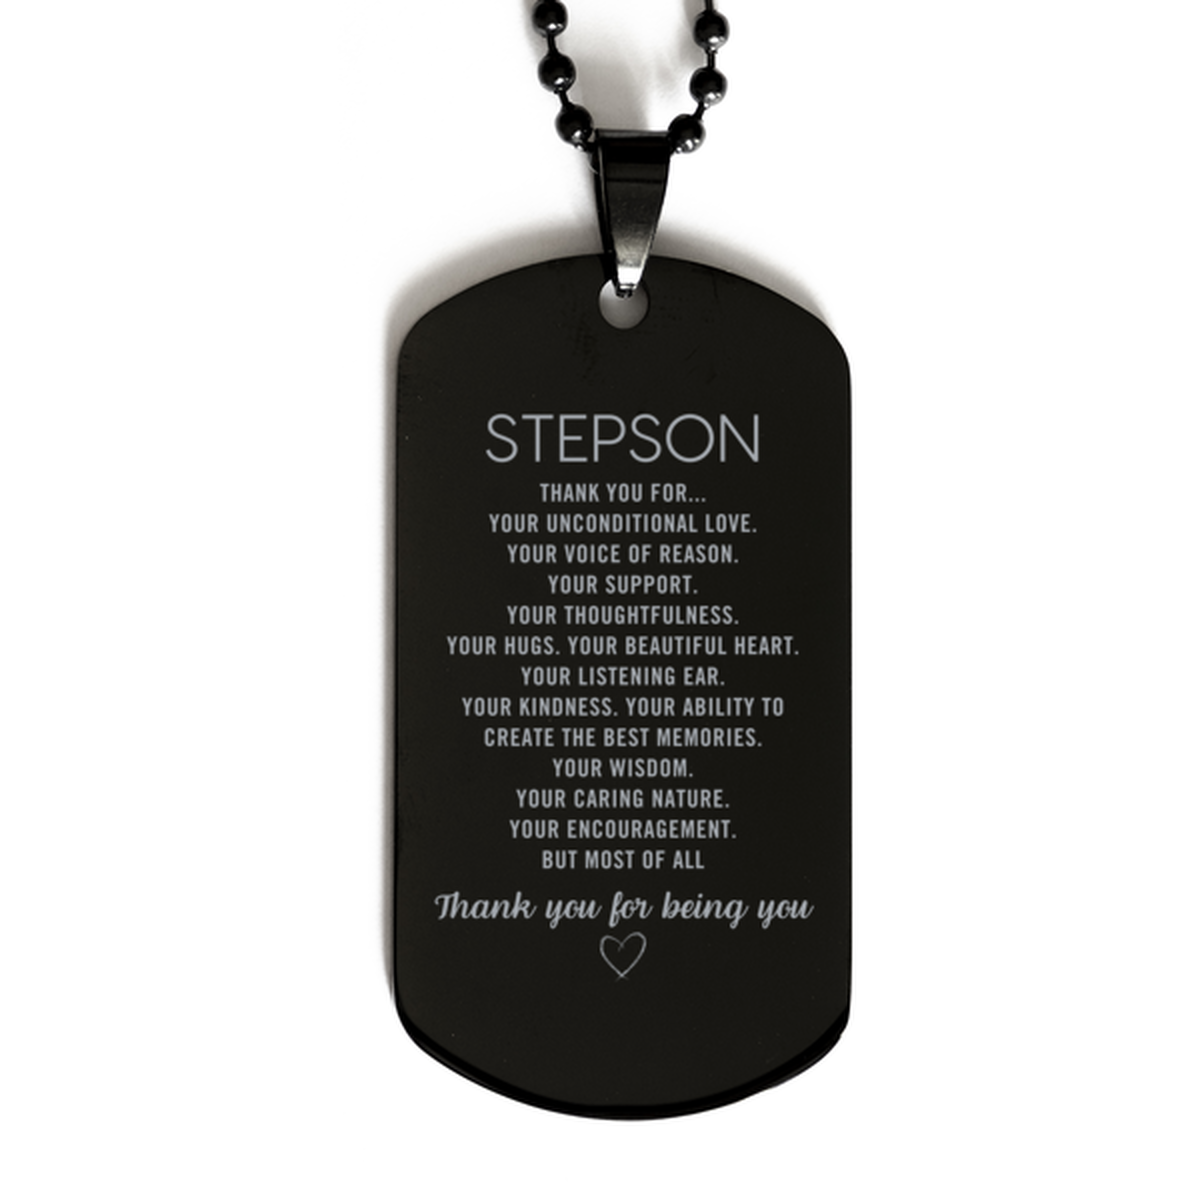 Stepson Black Dog Tag Custom, Engraved Gifts For Stepson Christmas Graduation Birthday Gifts for Men Women Stepson Thank you for Your unconditional love